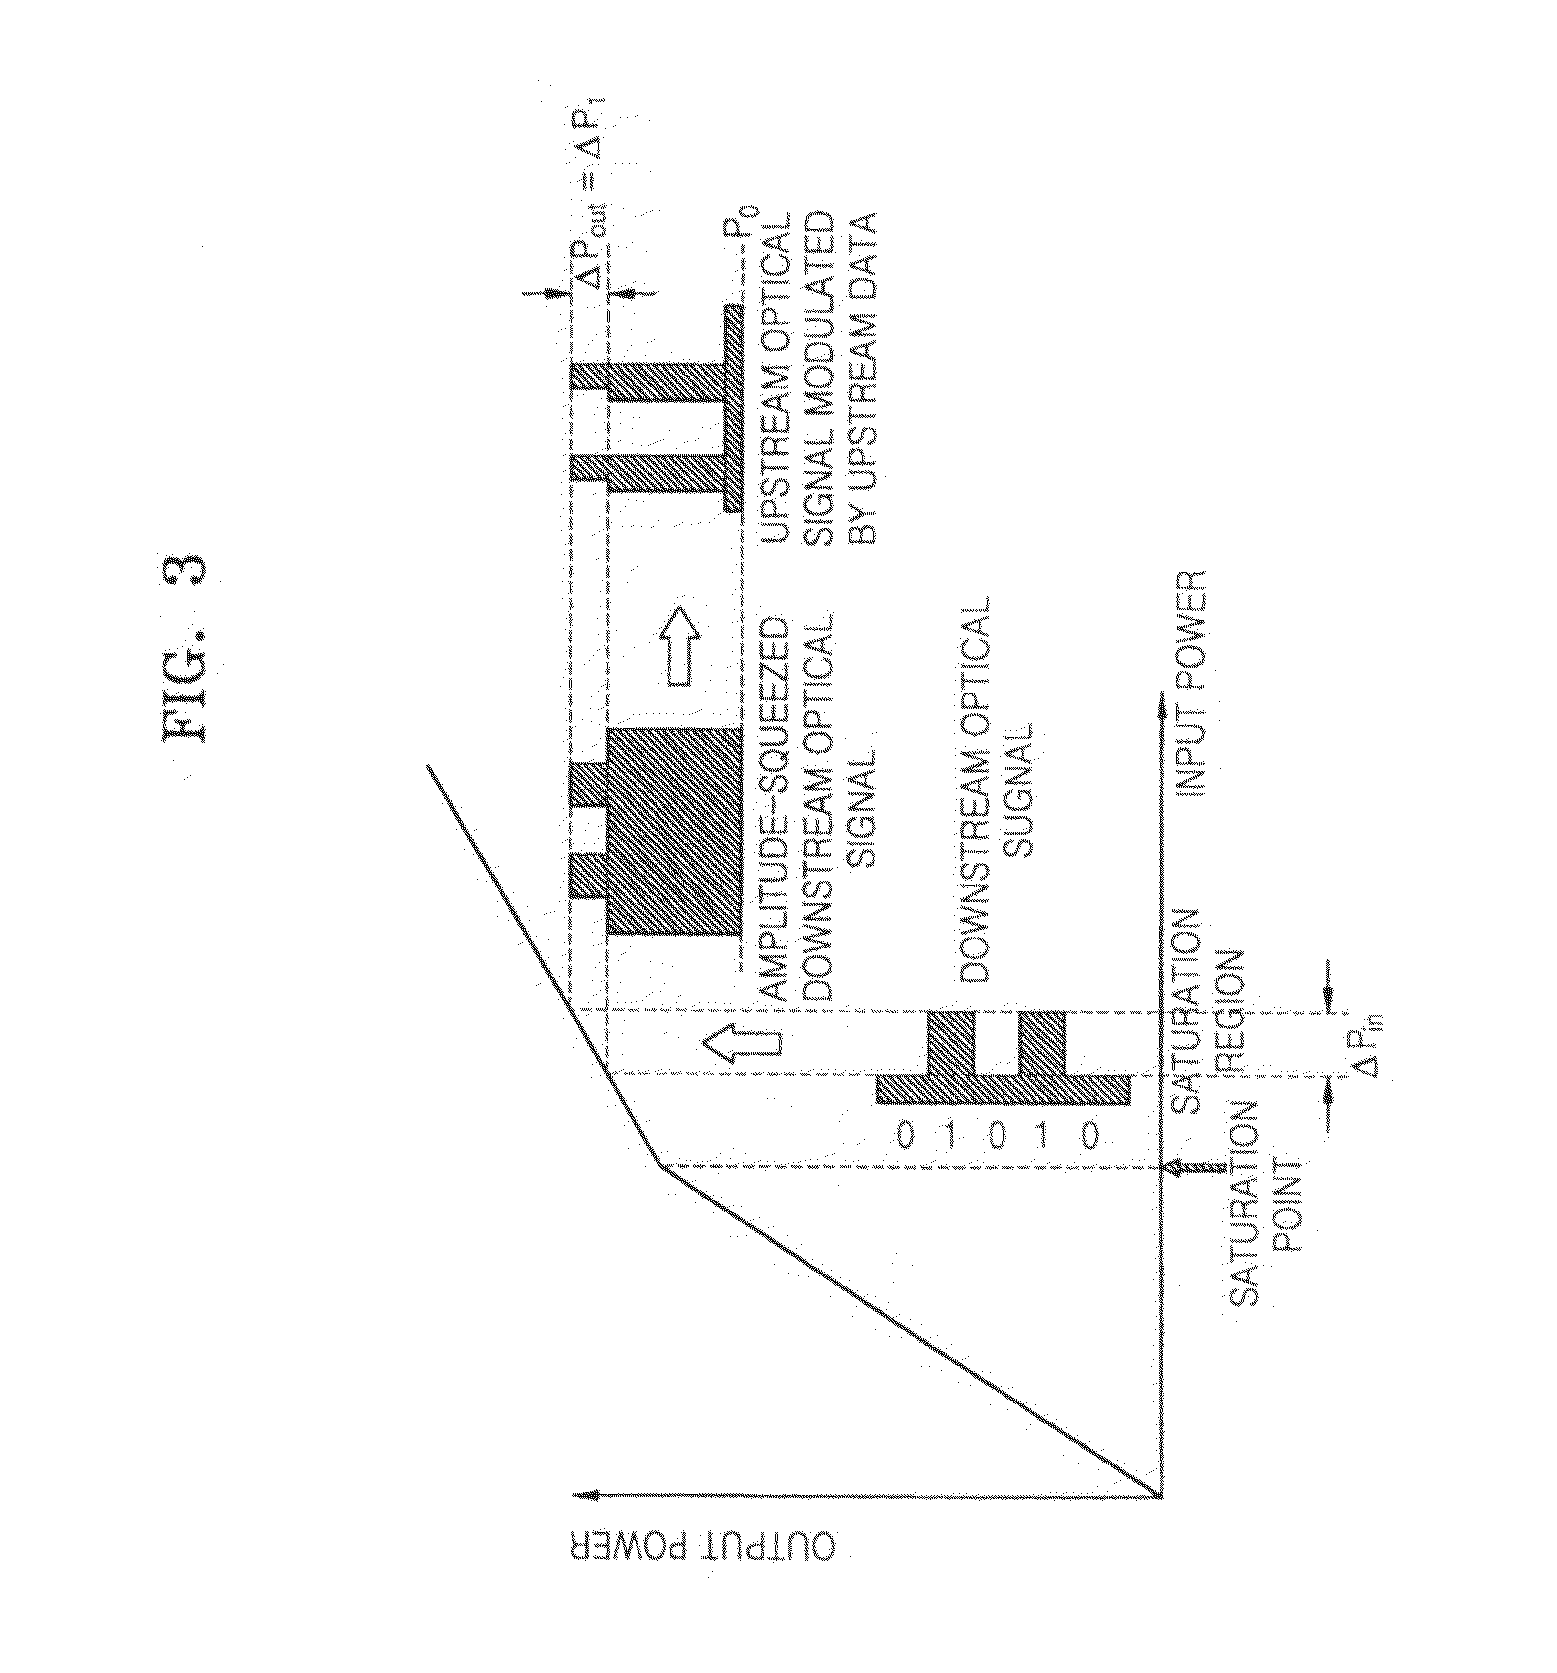 Apparatus and method for olt and onu for wavelength agnostic wavelength-division multiplexed passive optical networks